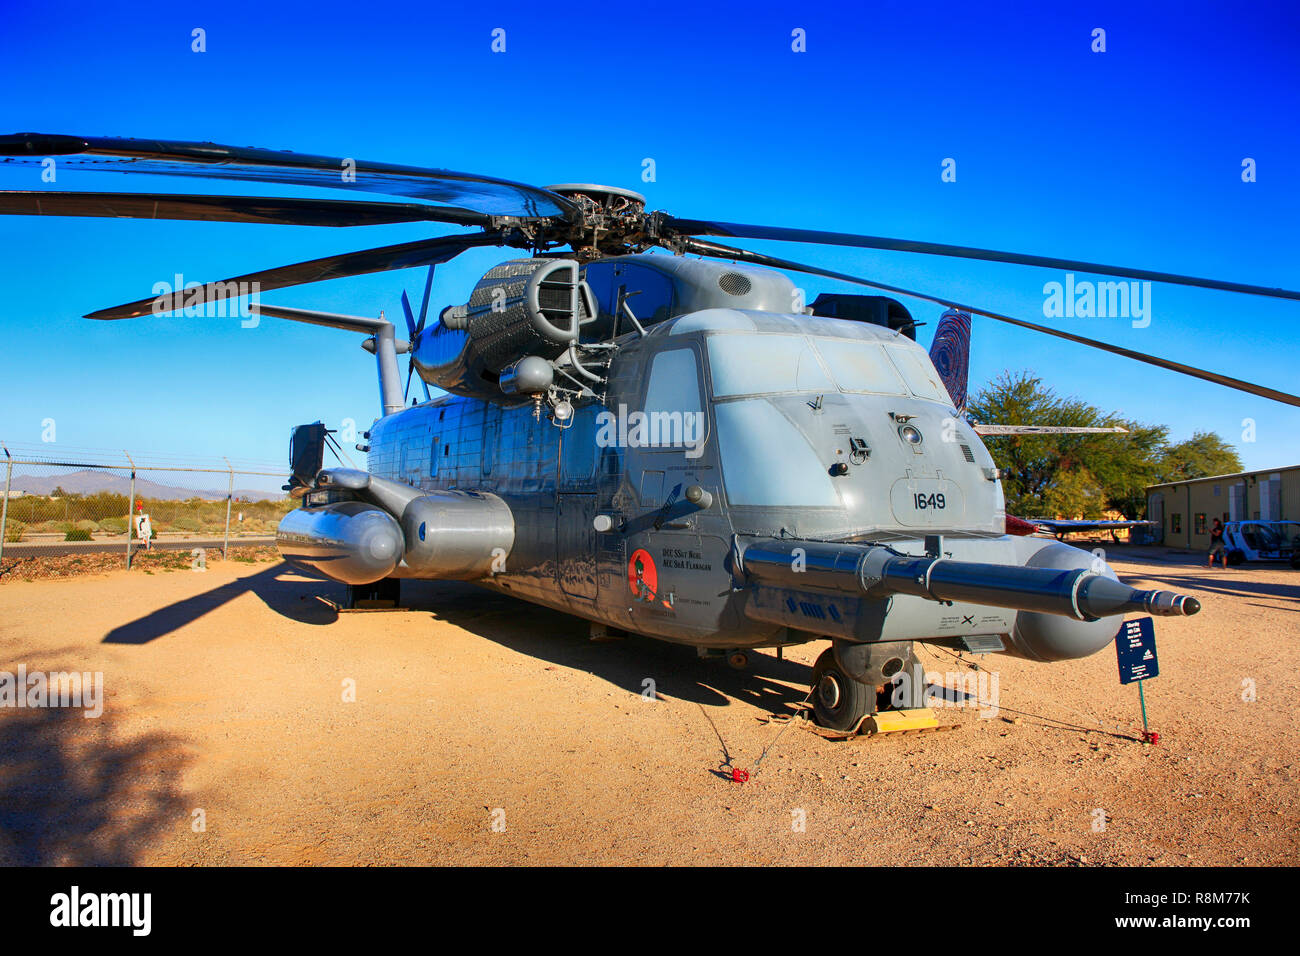 Sikorsky MH-53M long-range CSAR helicopter on display at the Pima Air & Space Museum in Tucson, AZ Stock Photo